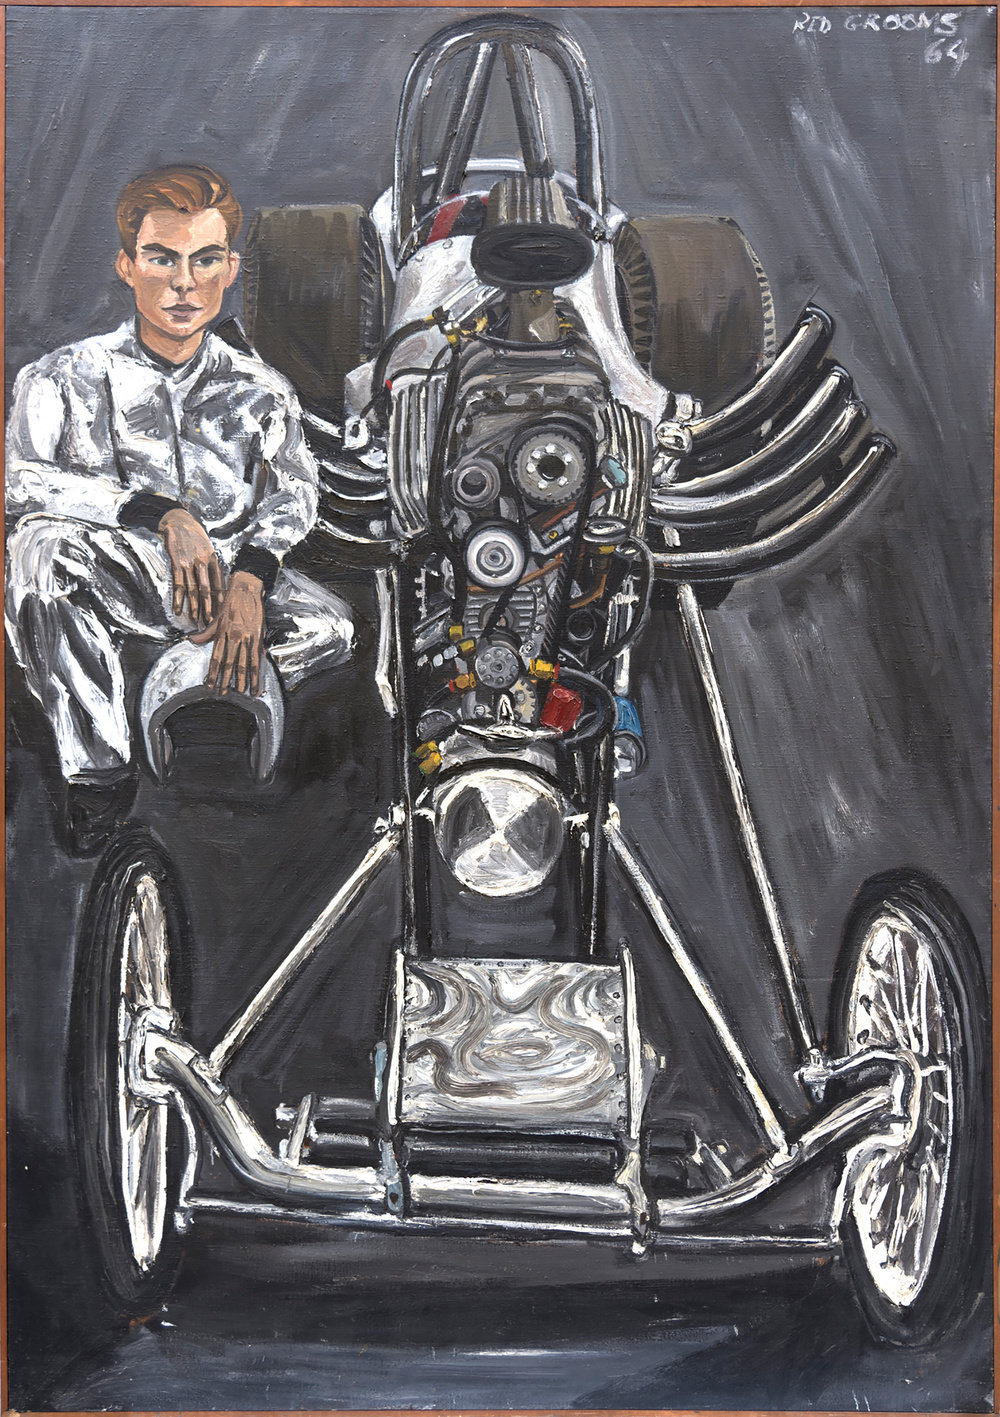 Grooms, rodger and his dragster, 1964, oil on canvas, 79 3 4 x 46 in., 202.6 x 116.8 cm, cnon 60.157